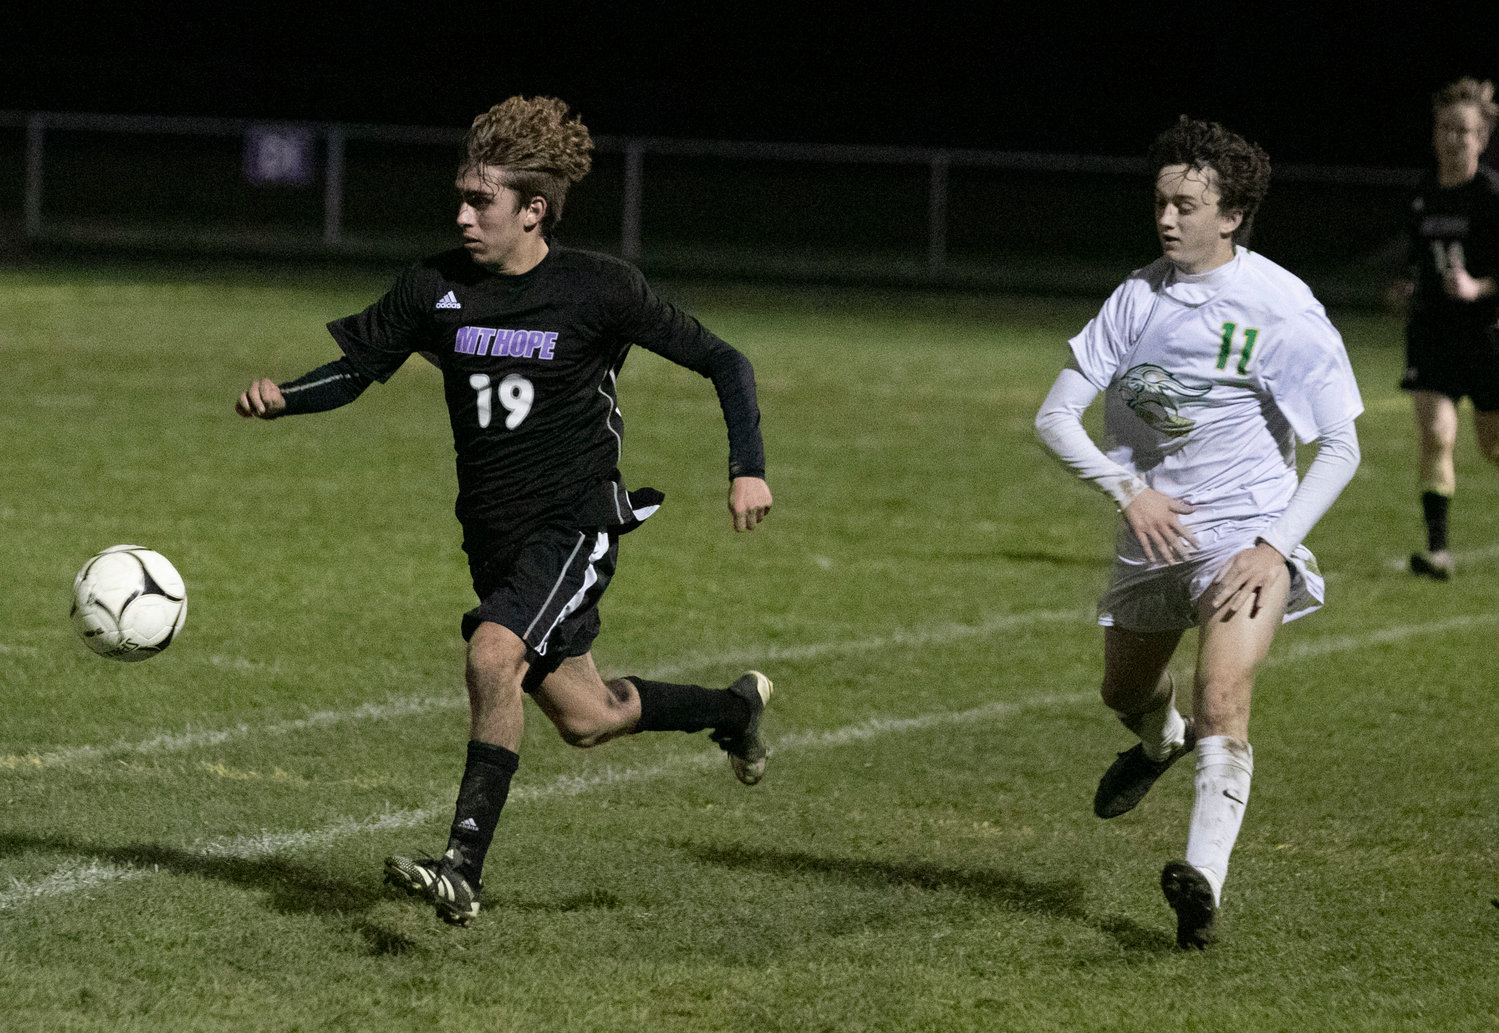 Maddox Canario races down the field with the ball. “Maddox was the best player on the field,” said Coach Couto. “To see a freshman to do that for these seniors as a coach, it means the world to you.”